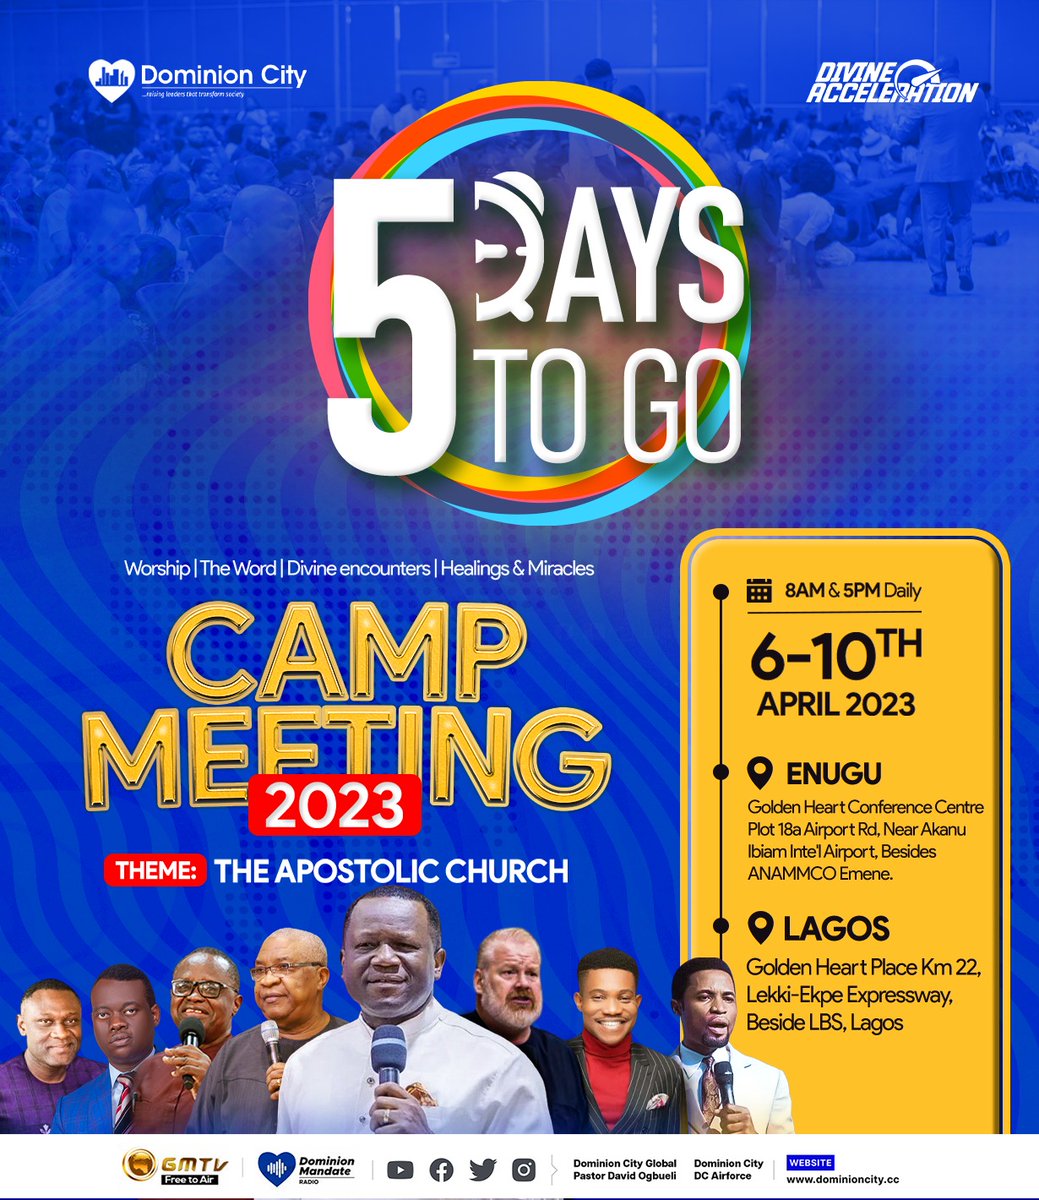 Wao, just 5days to go. Are you super-excited and well prepared? #pastordavidogbueli #dominioncity #campmeeting #easter #Easter2023